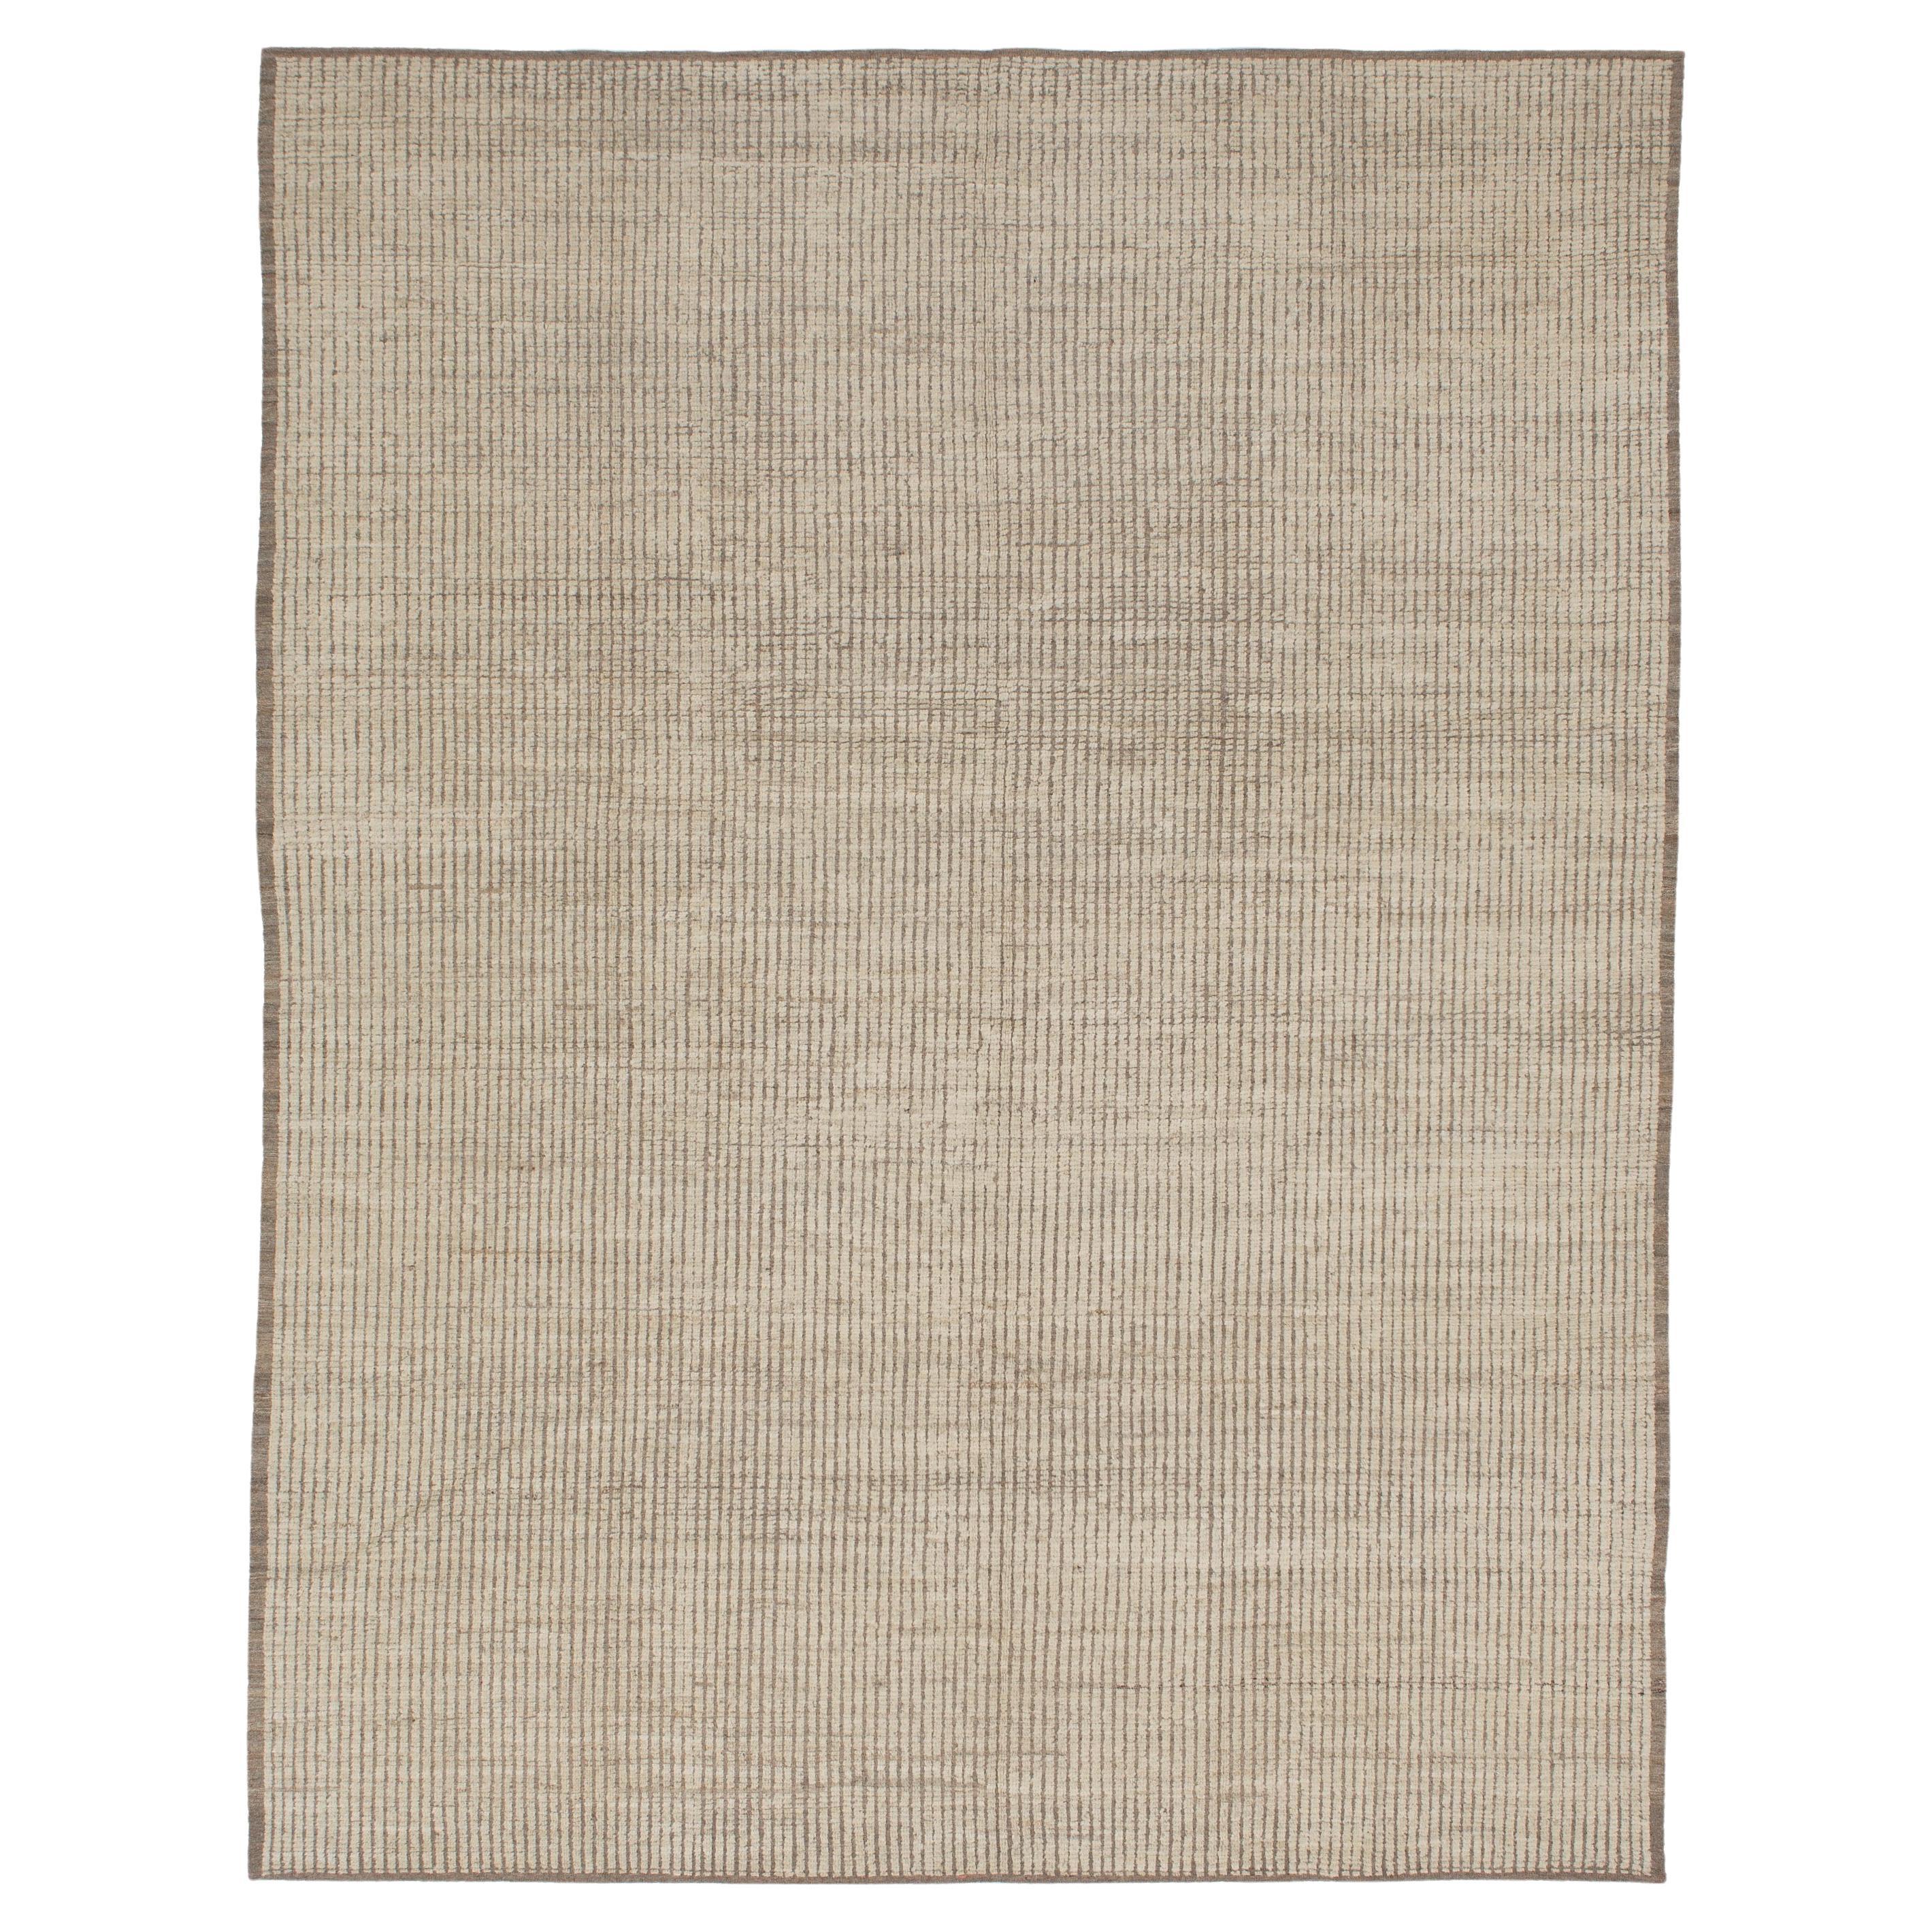 abc carpet Cream Solid Zameen Modern Wool Rug - 9'4" x 12' For Sale